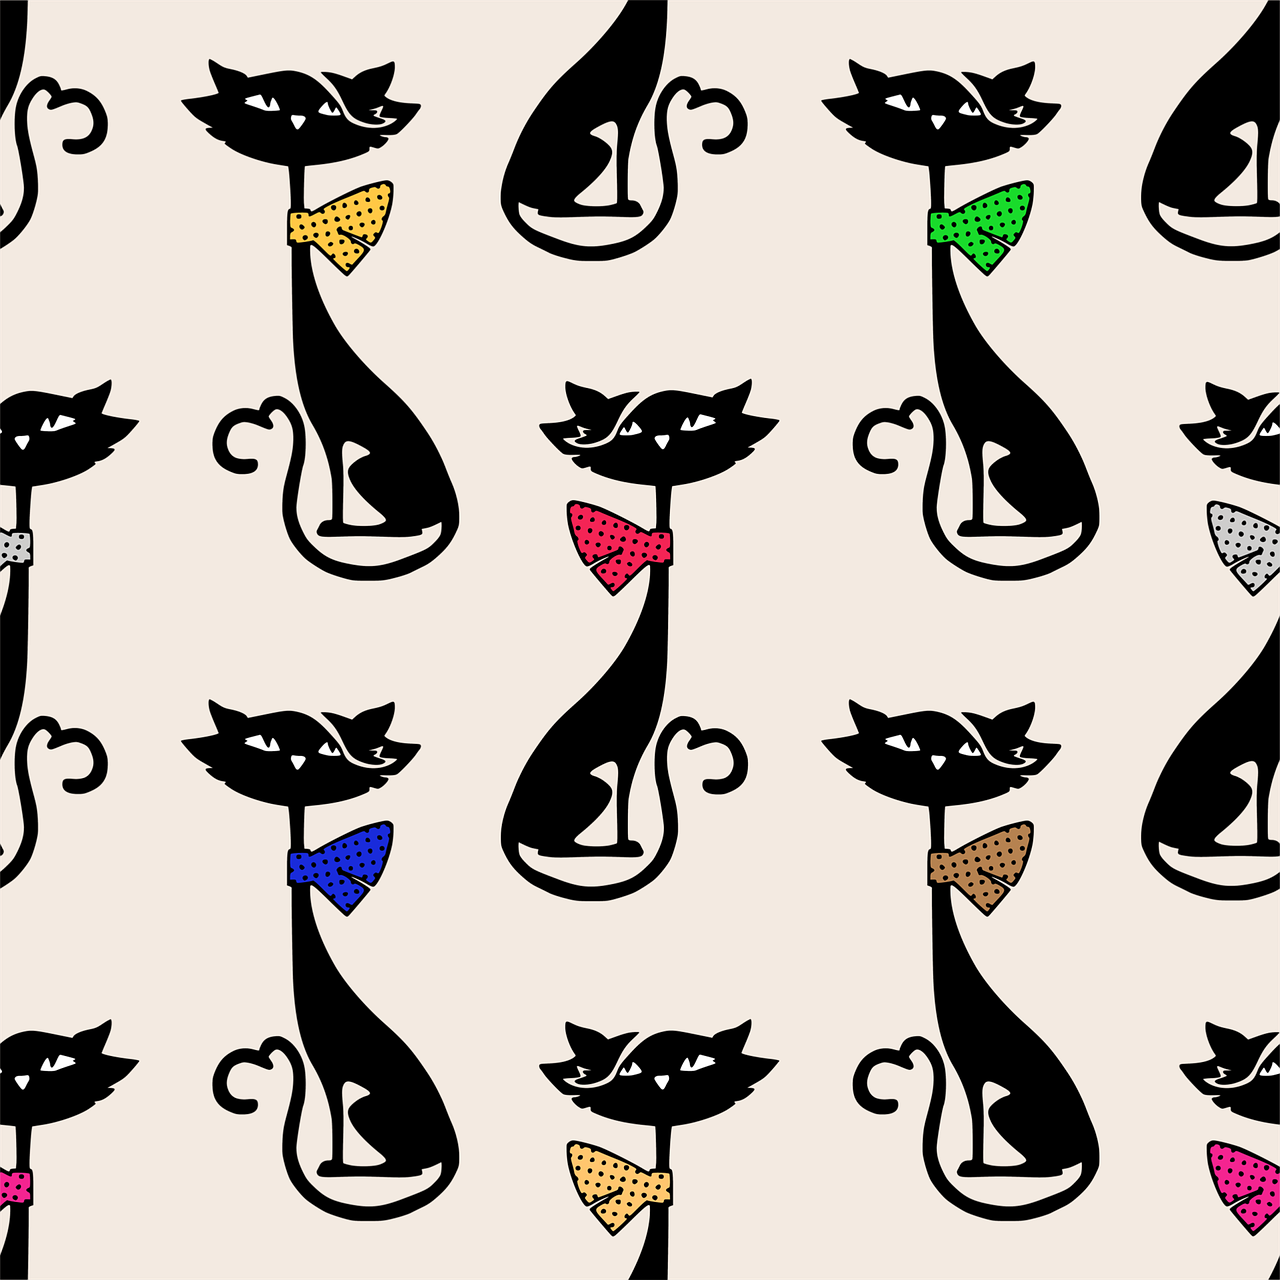 a group of black cats with colorful bow ties, pixabay, art nouveau, repeating pattern. seamless, clipart, windsor knot tie, full body close-up shot